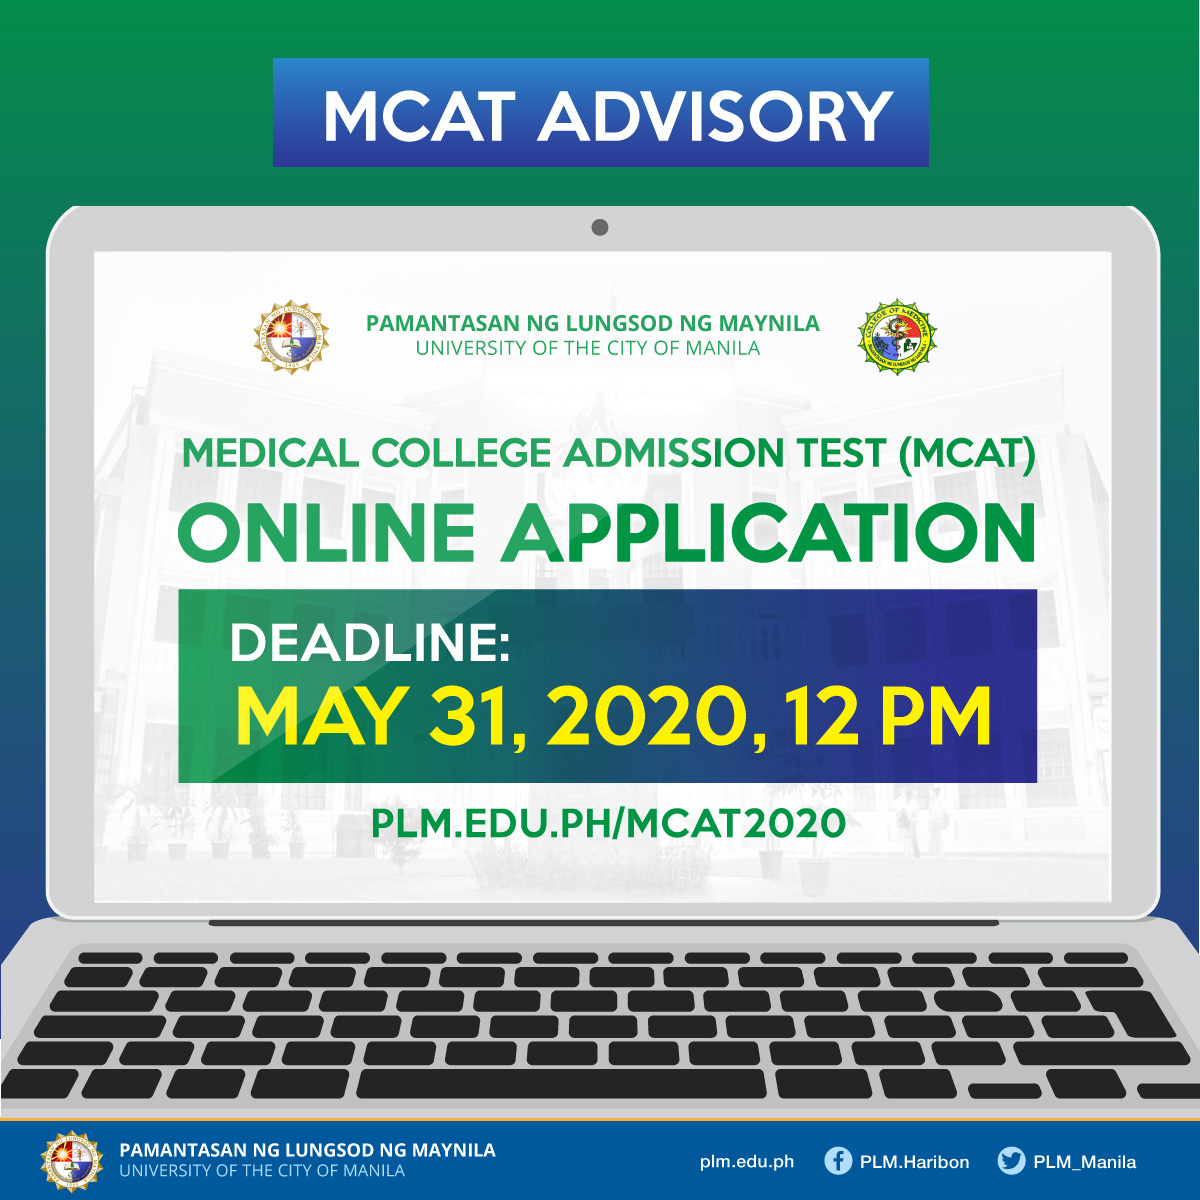 PLM's MCAT deadline extended to May 31, 2020, 12 PM